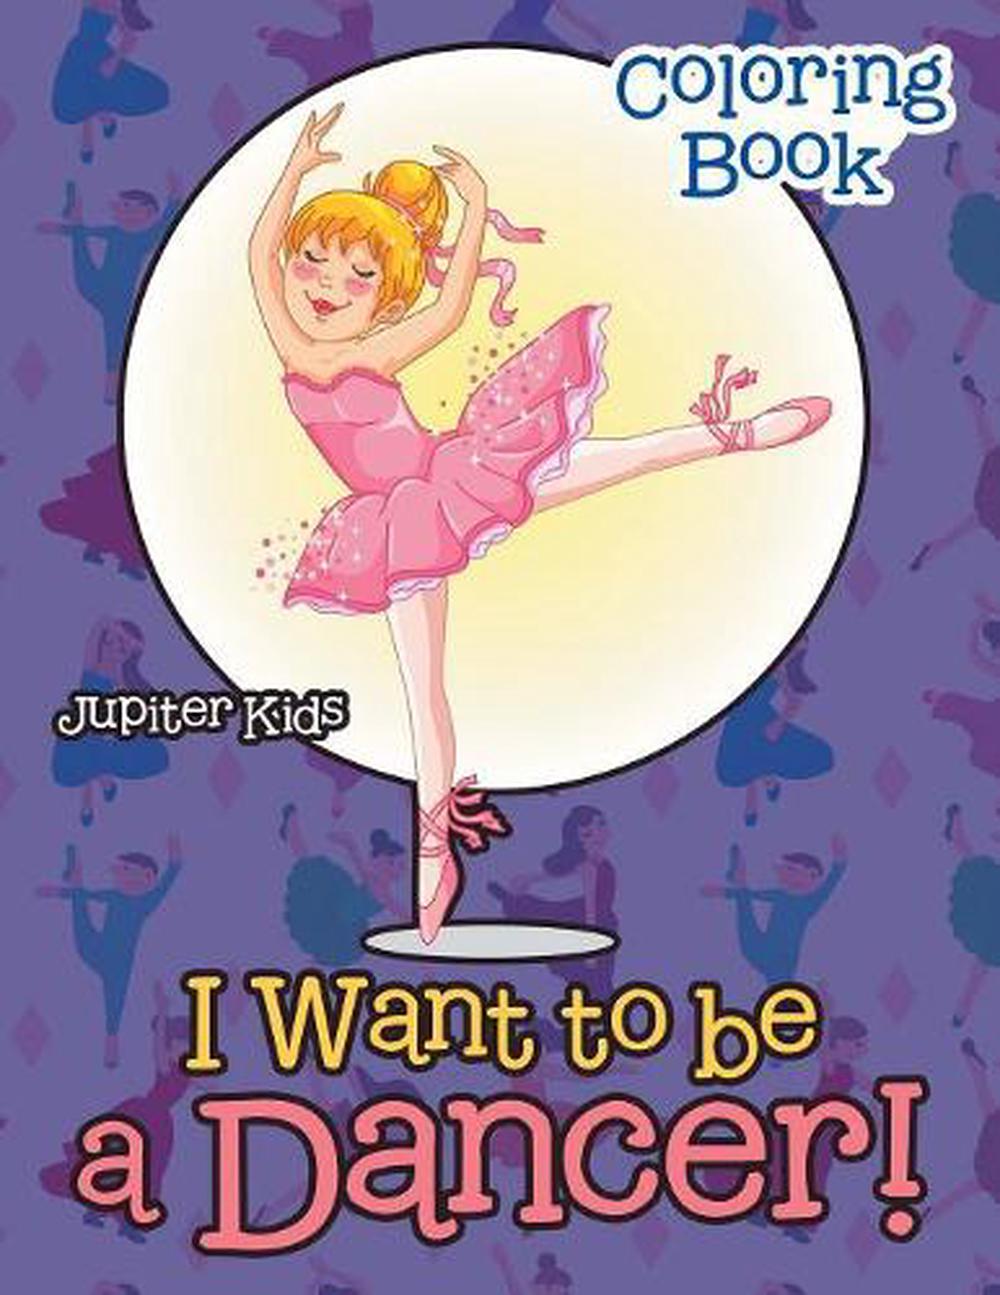 I Want to be a Dancer! Coloring Book by Jupiter Kids (English ...